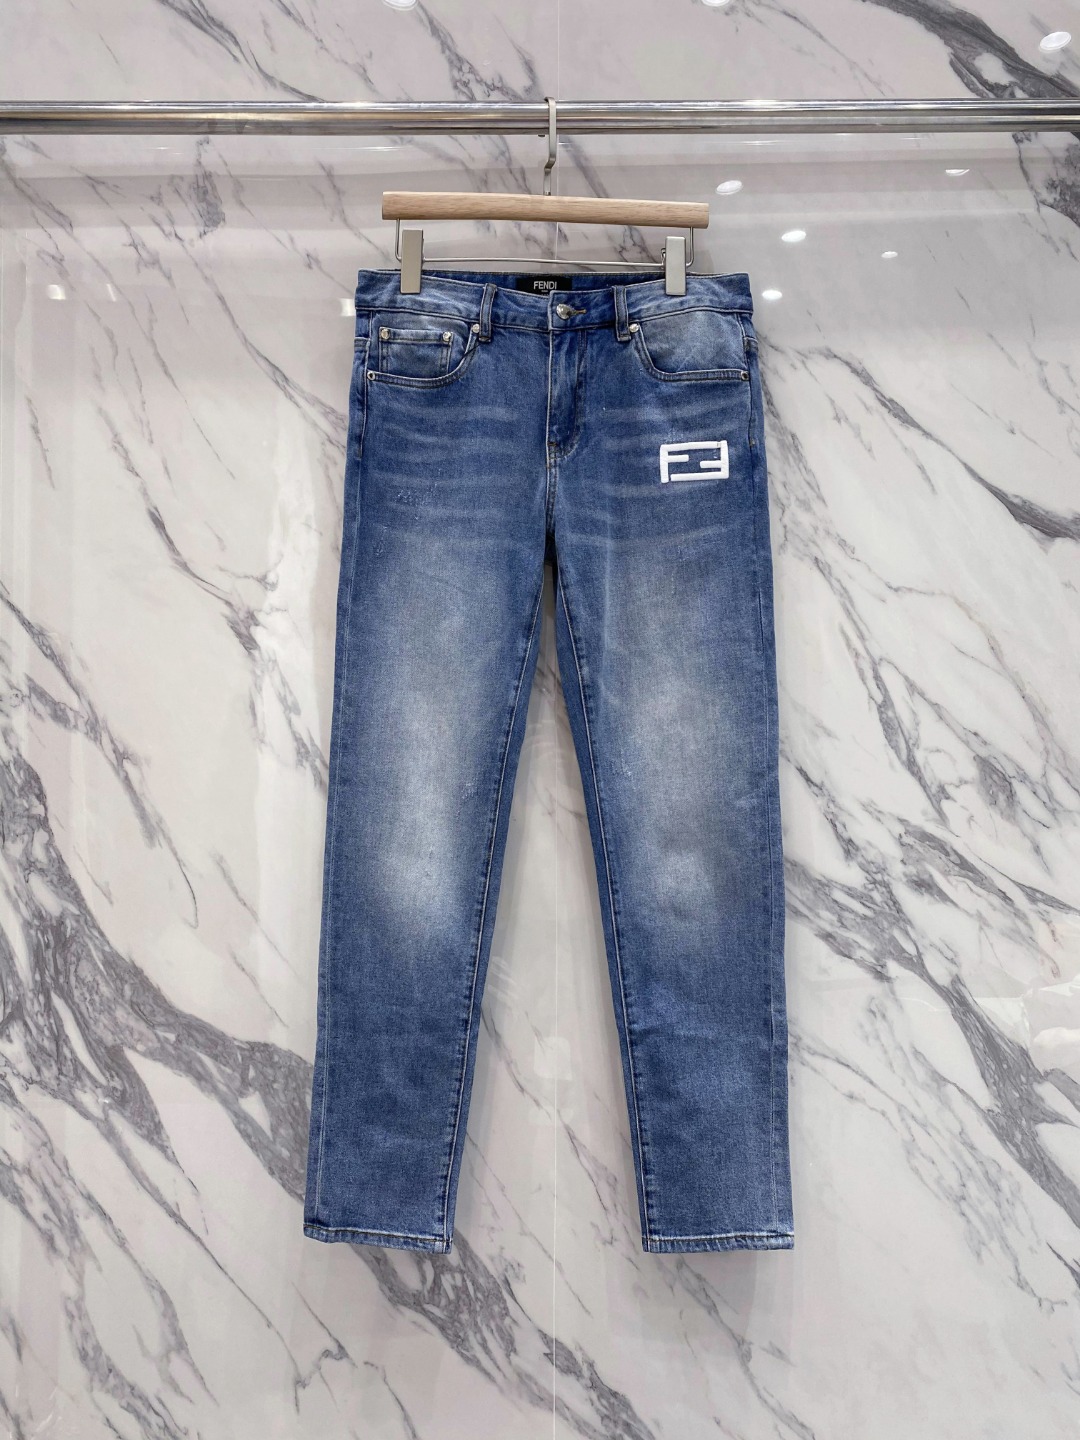 Fendi Clothing Jeans Embroidery Men Cotton Denim Fall/Winter Collection